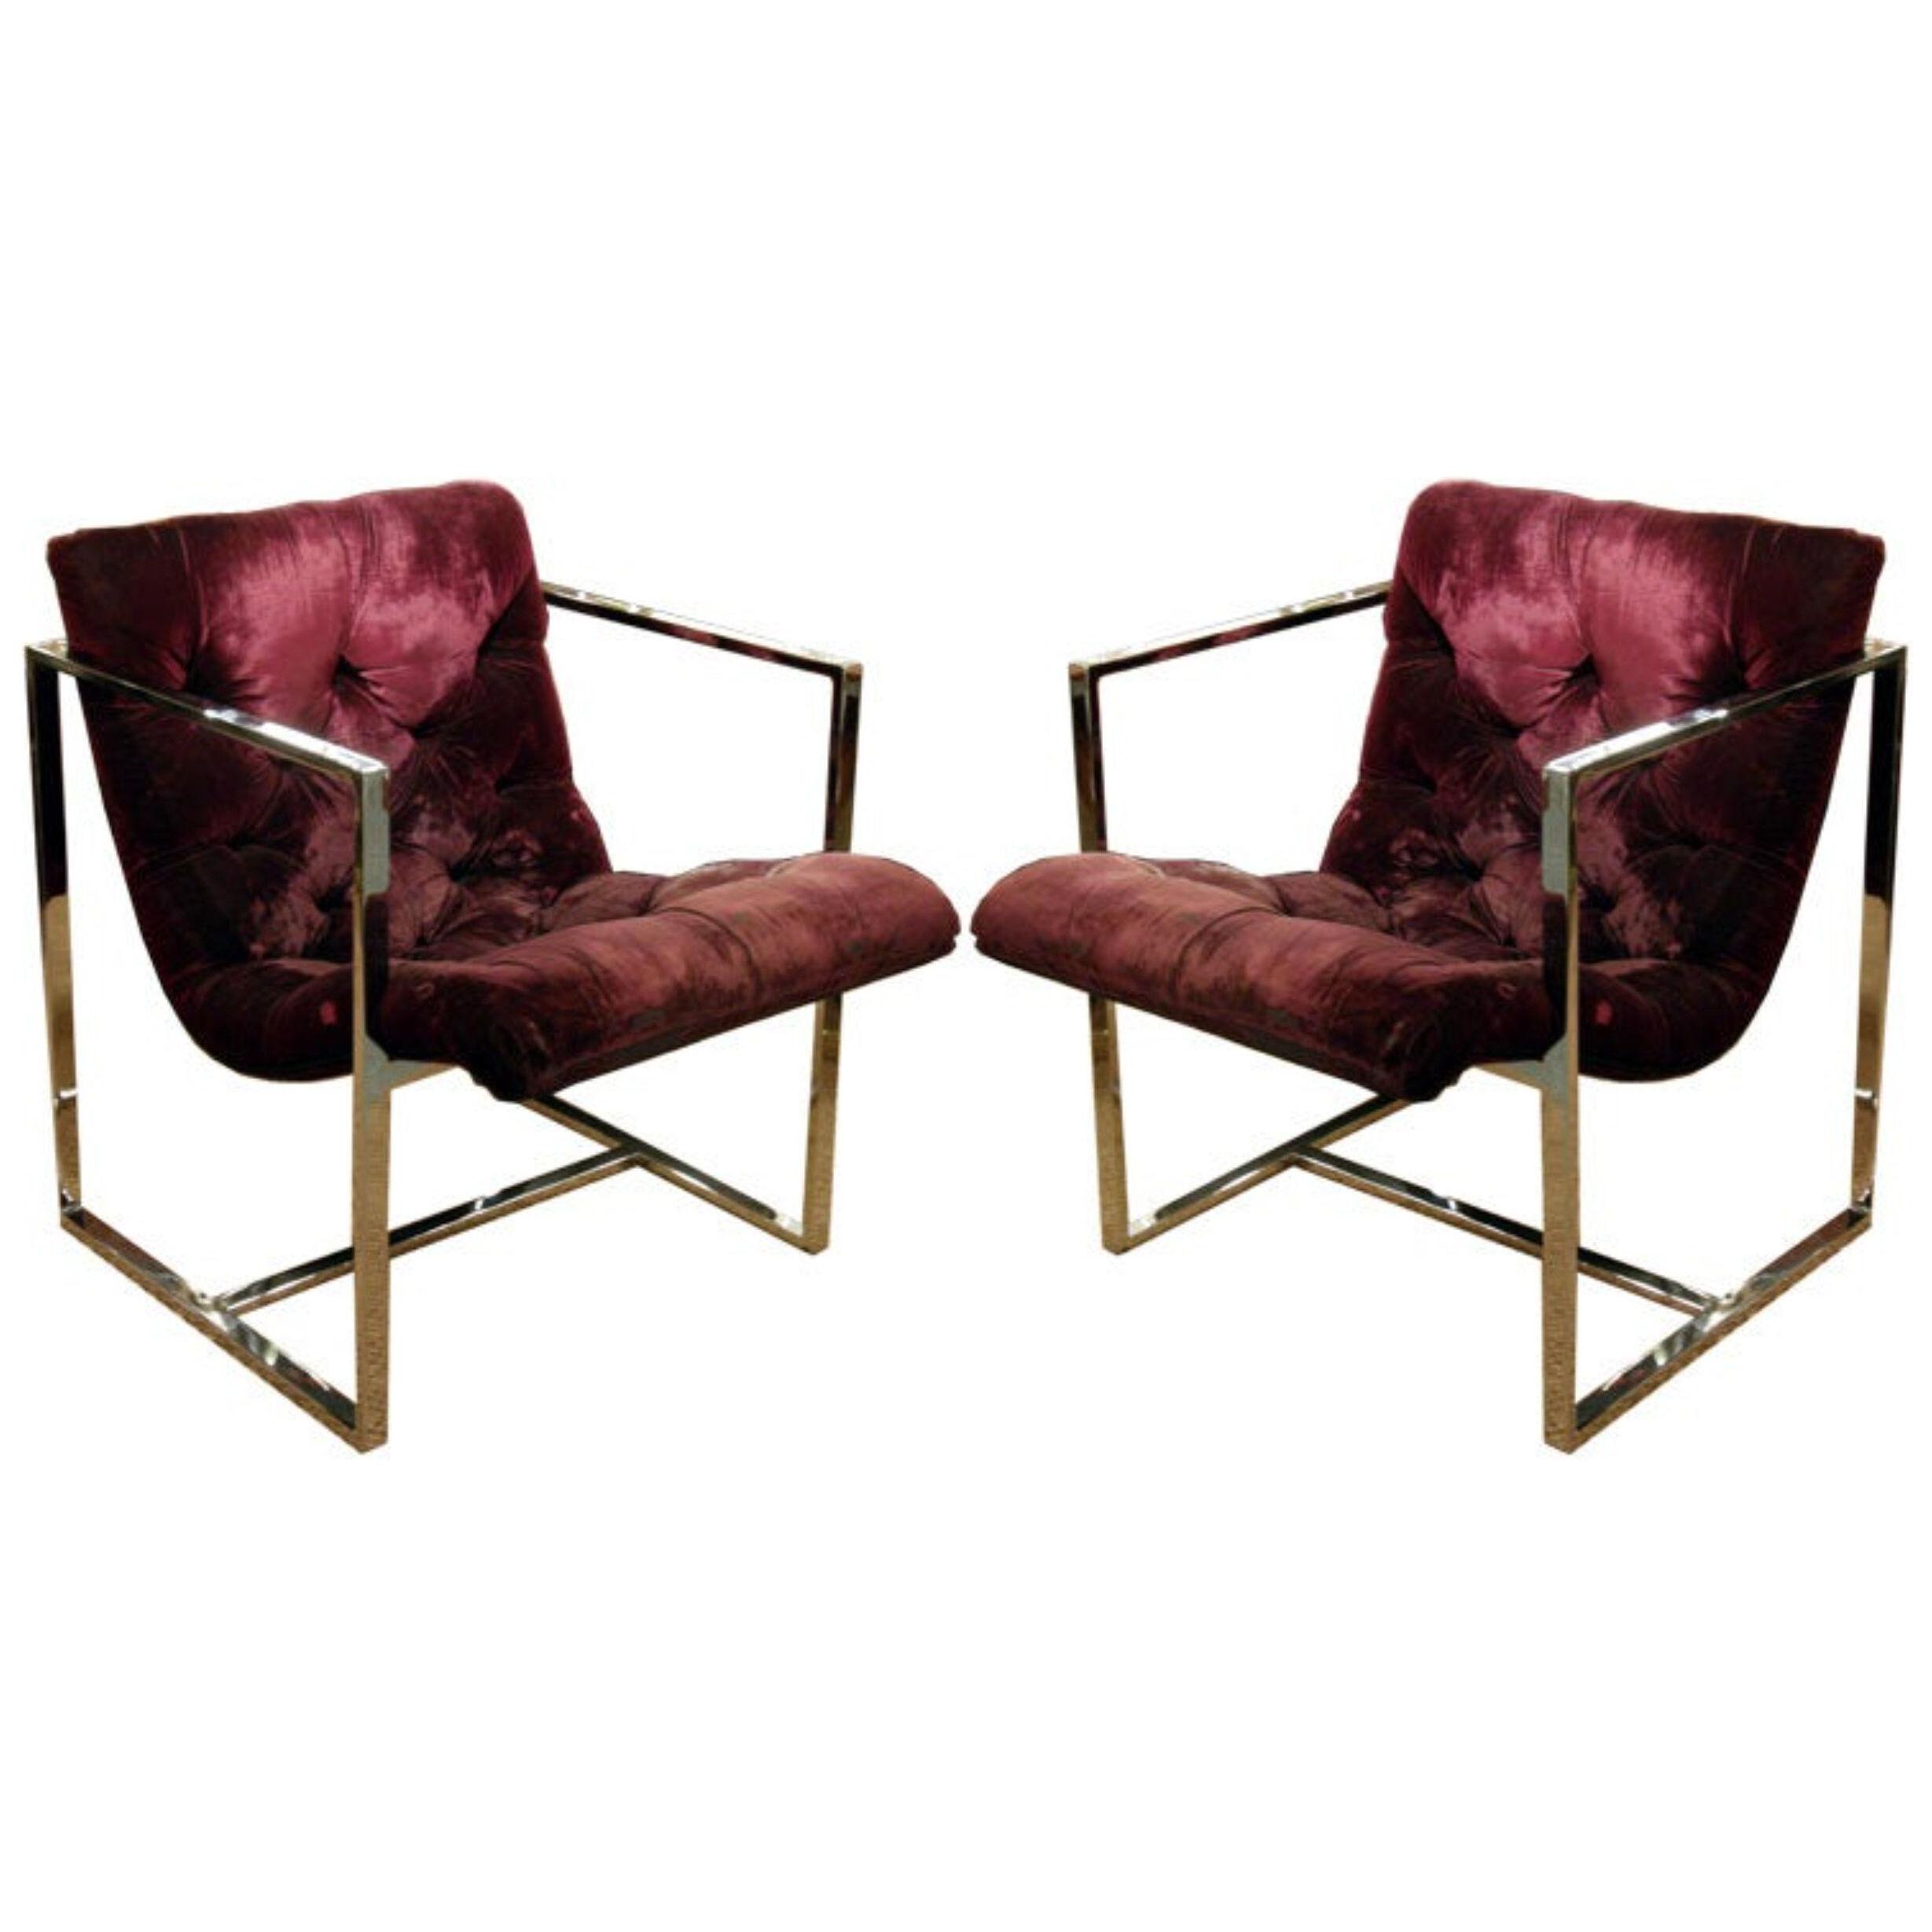 Pair of Square Framed Lounge Chairs by Silvercraft